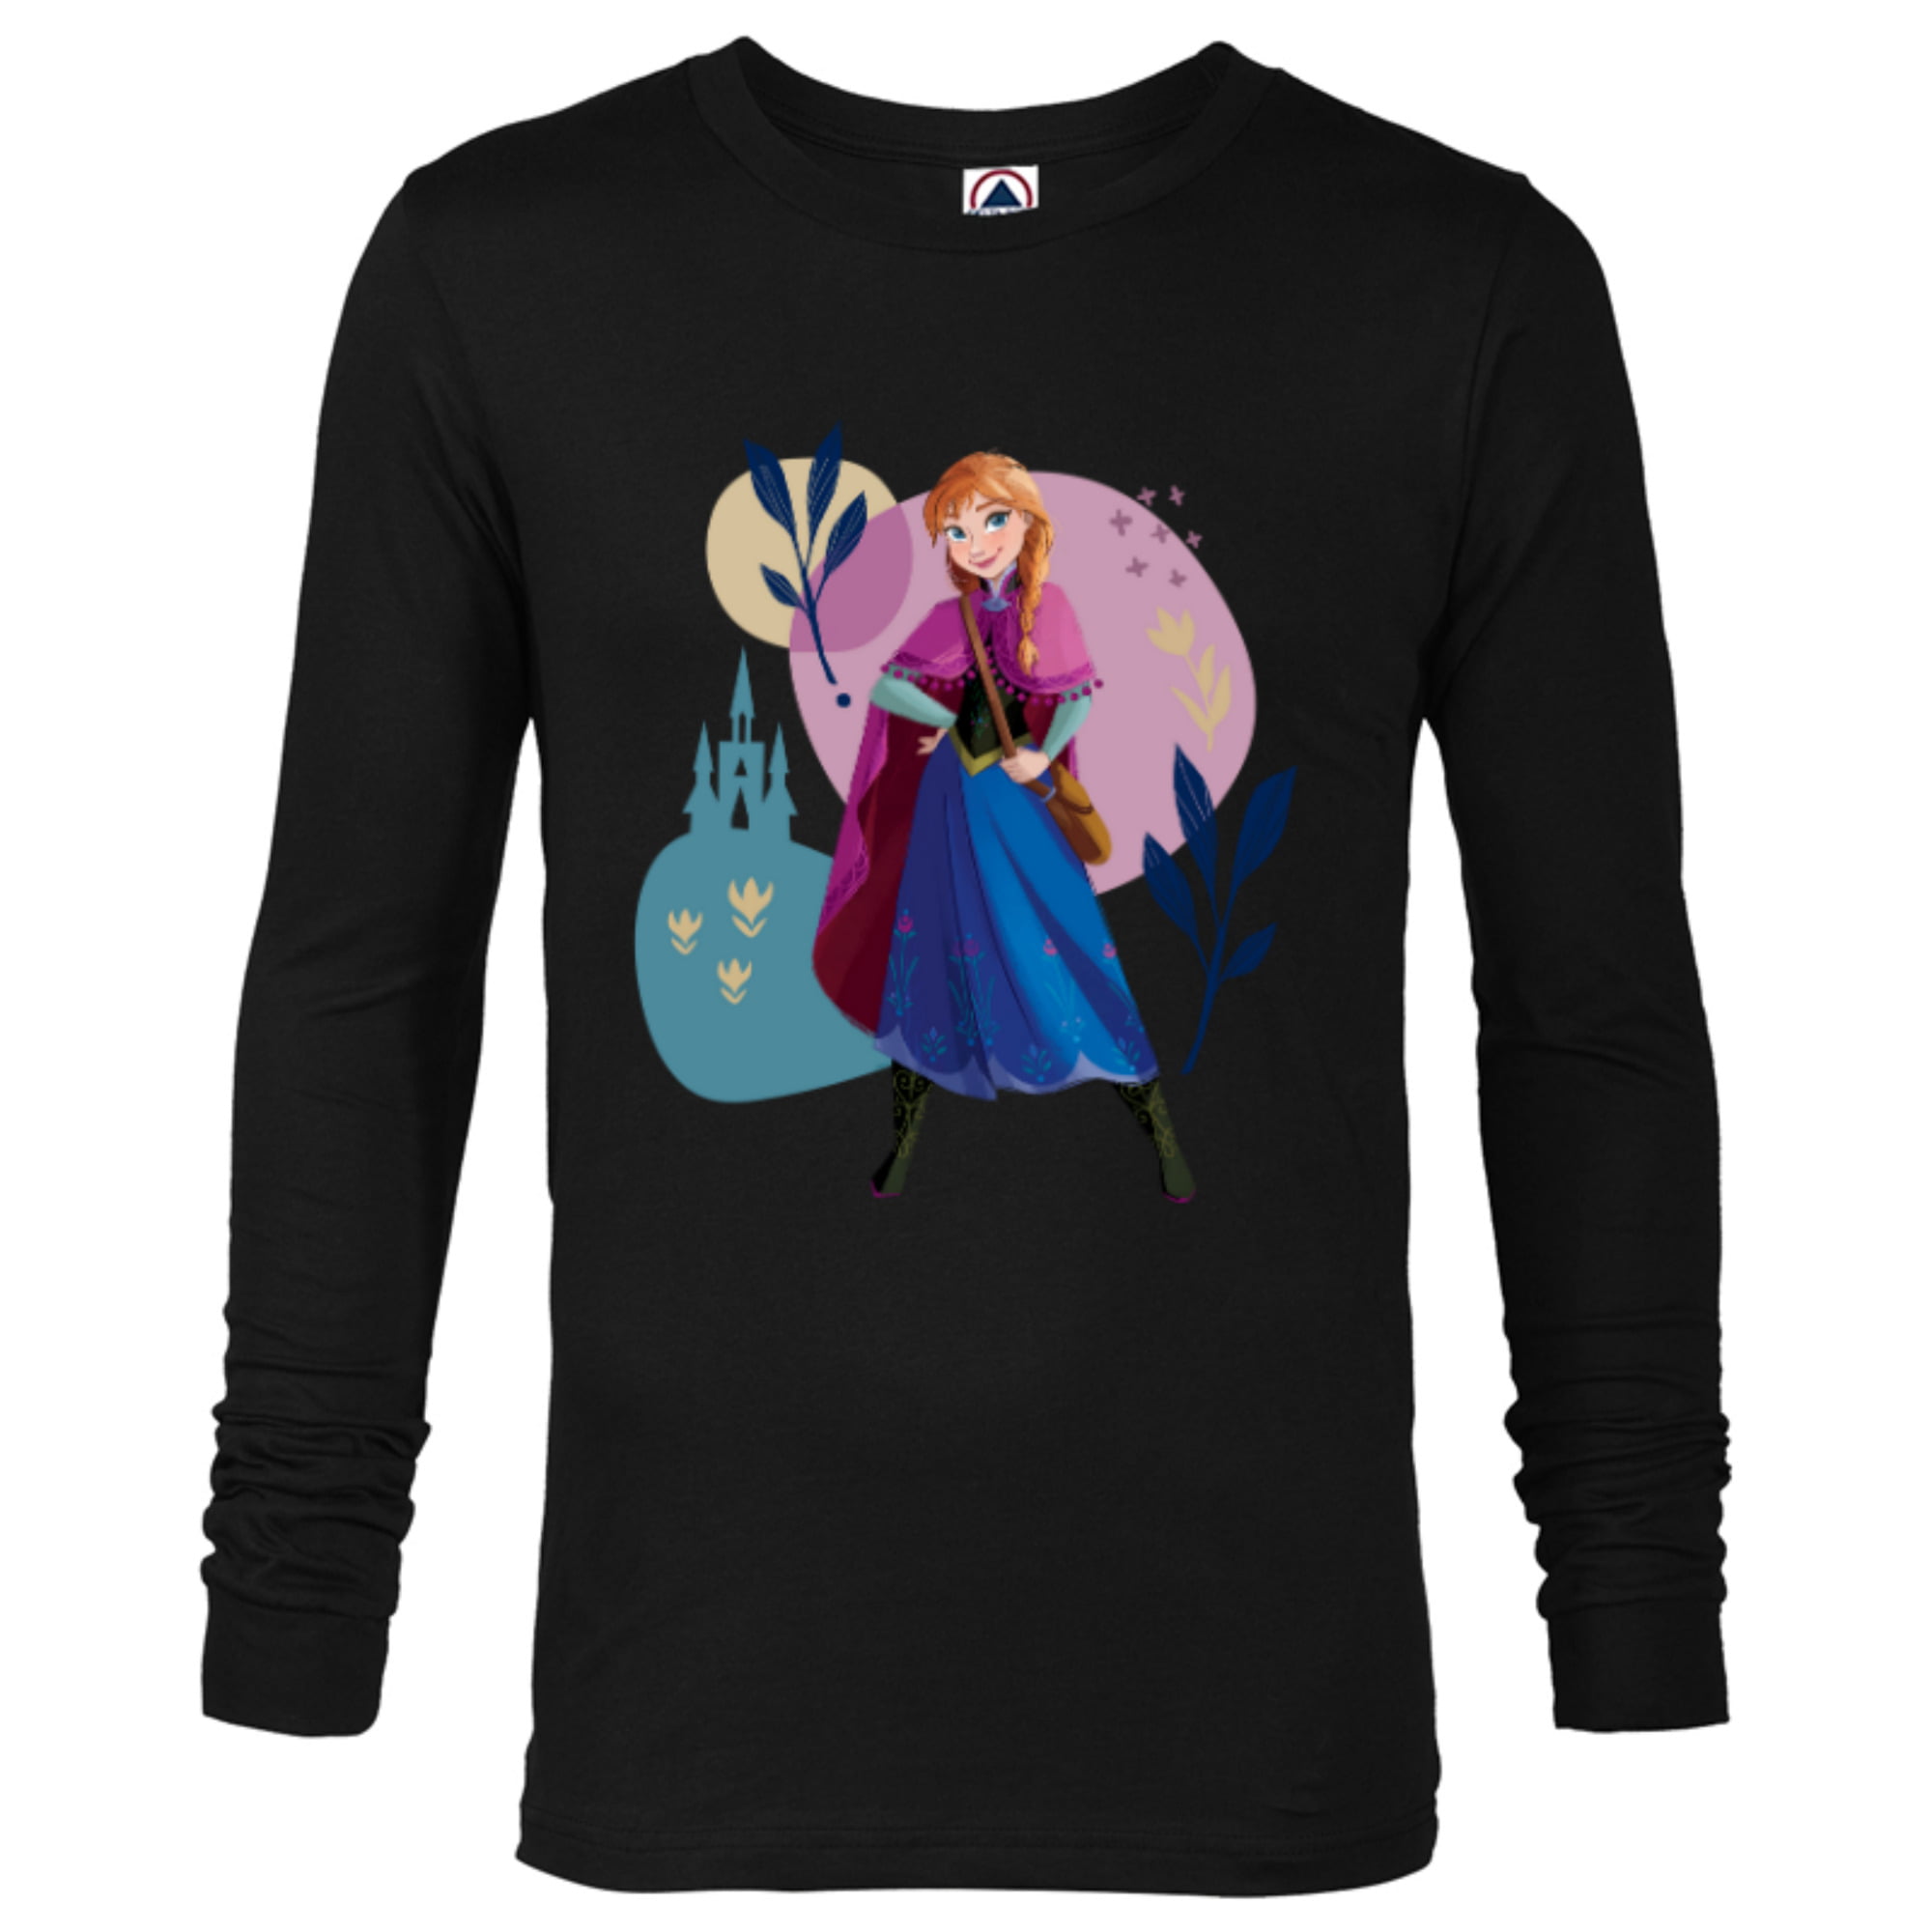 of - - Arendelle Customized-Athletic for Disney Long Heather Sleeve Anna Frozen T-Shirt Men Princess